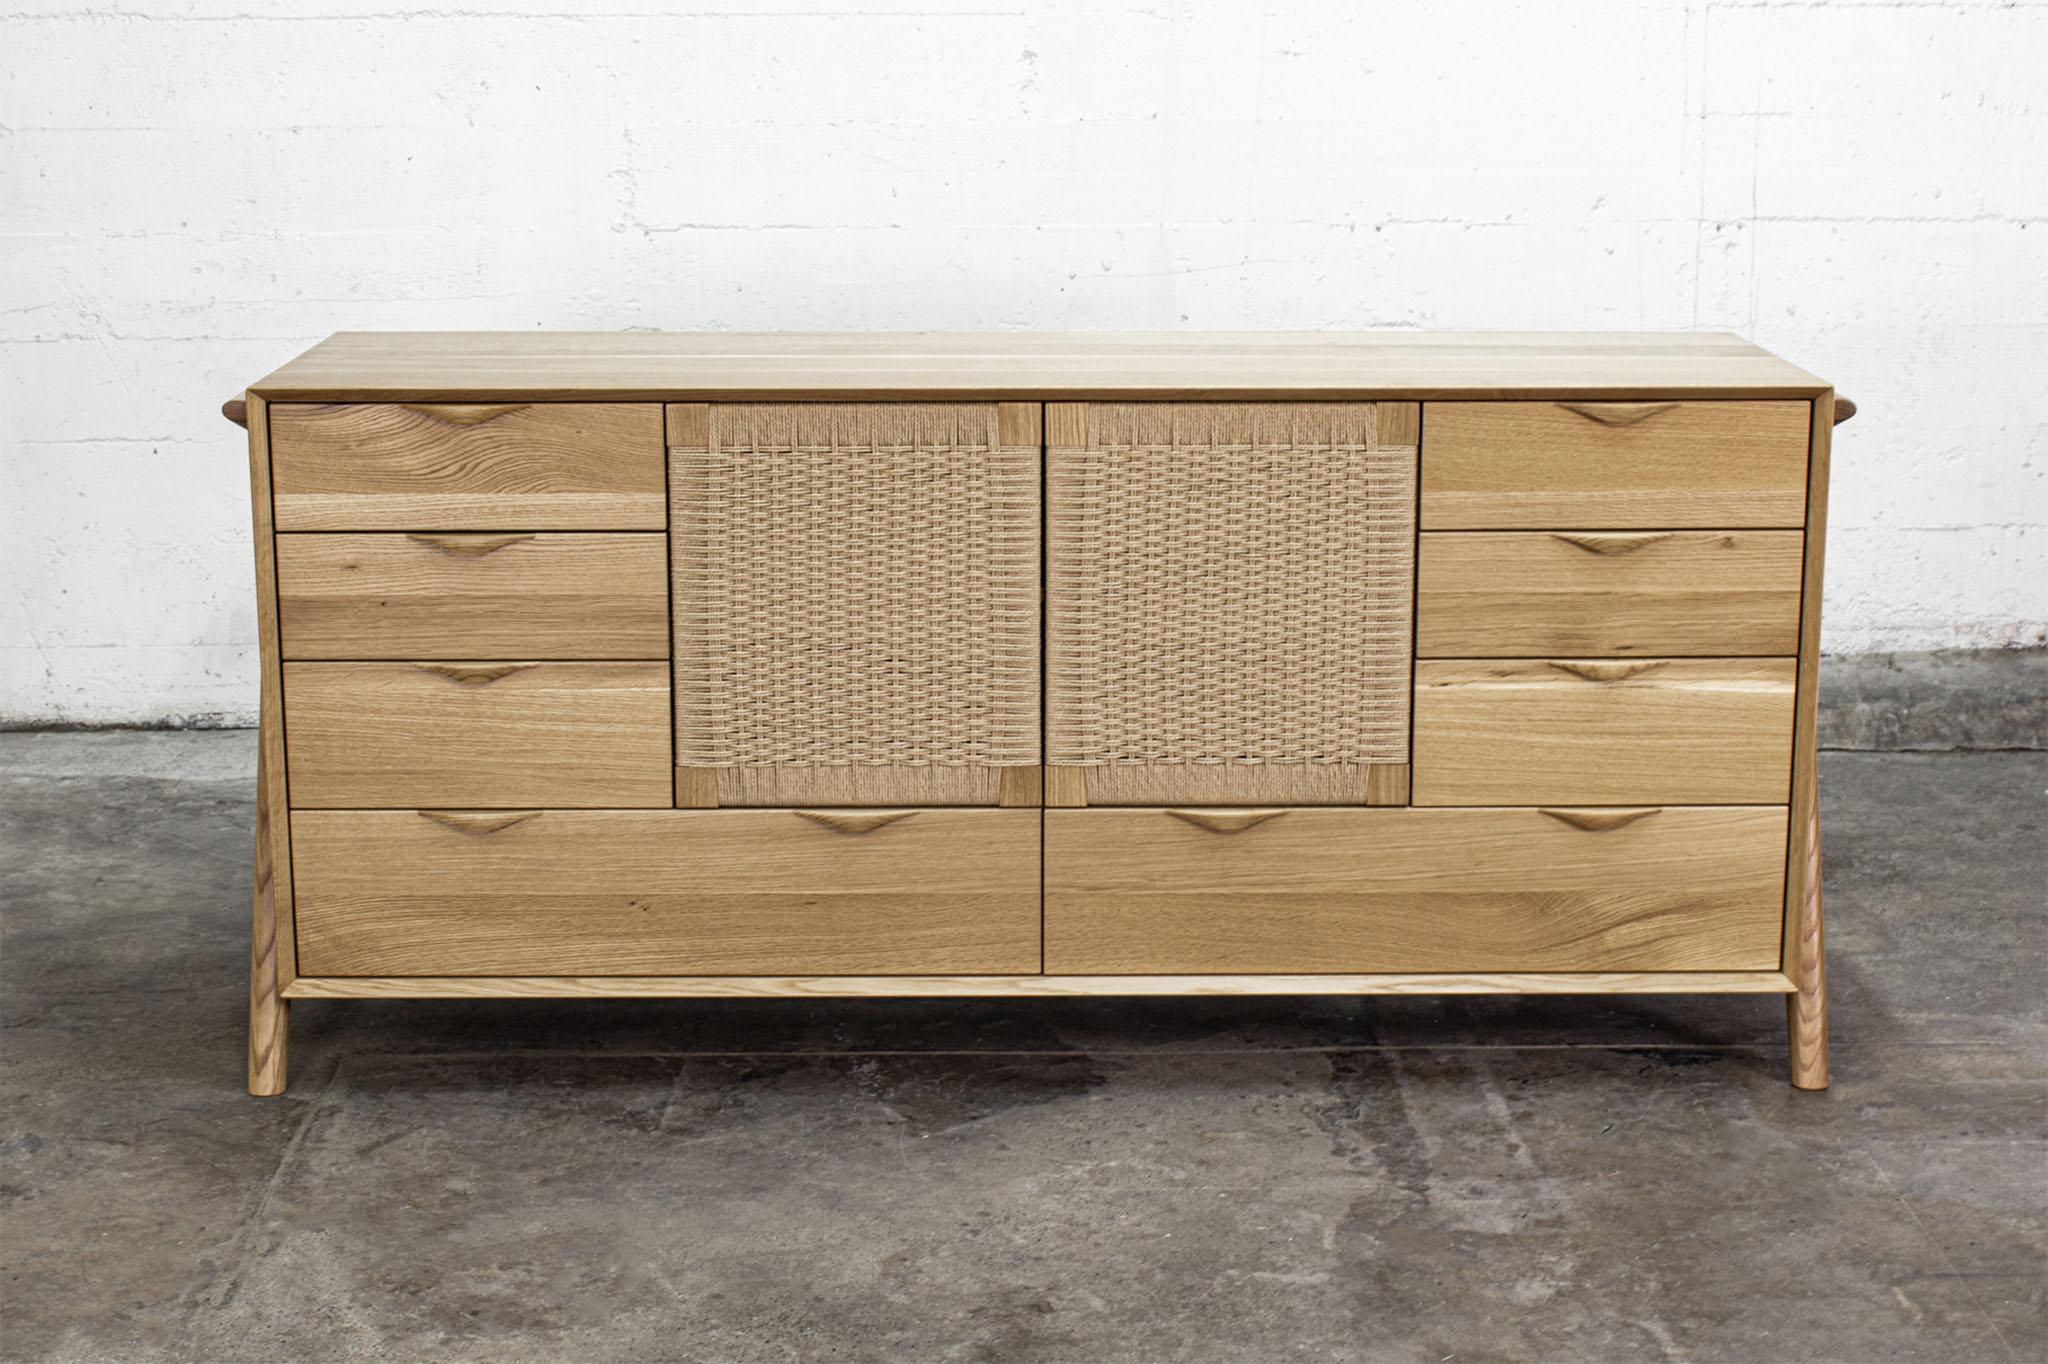 Contemporary Dresser, Hardwood, Lowboy, Danish Cord, Woven Doors, Drawers, Midcentury Style For Sale